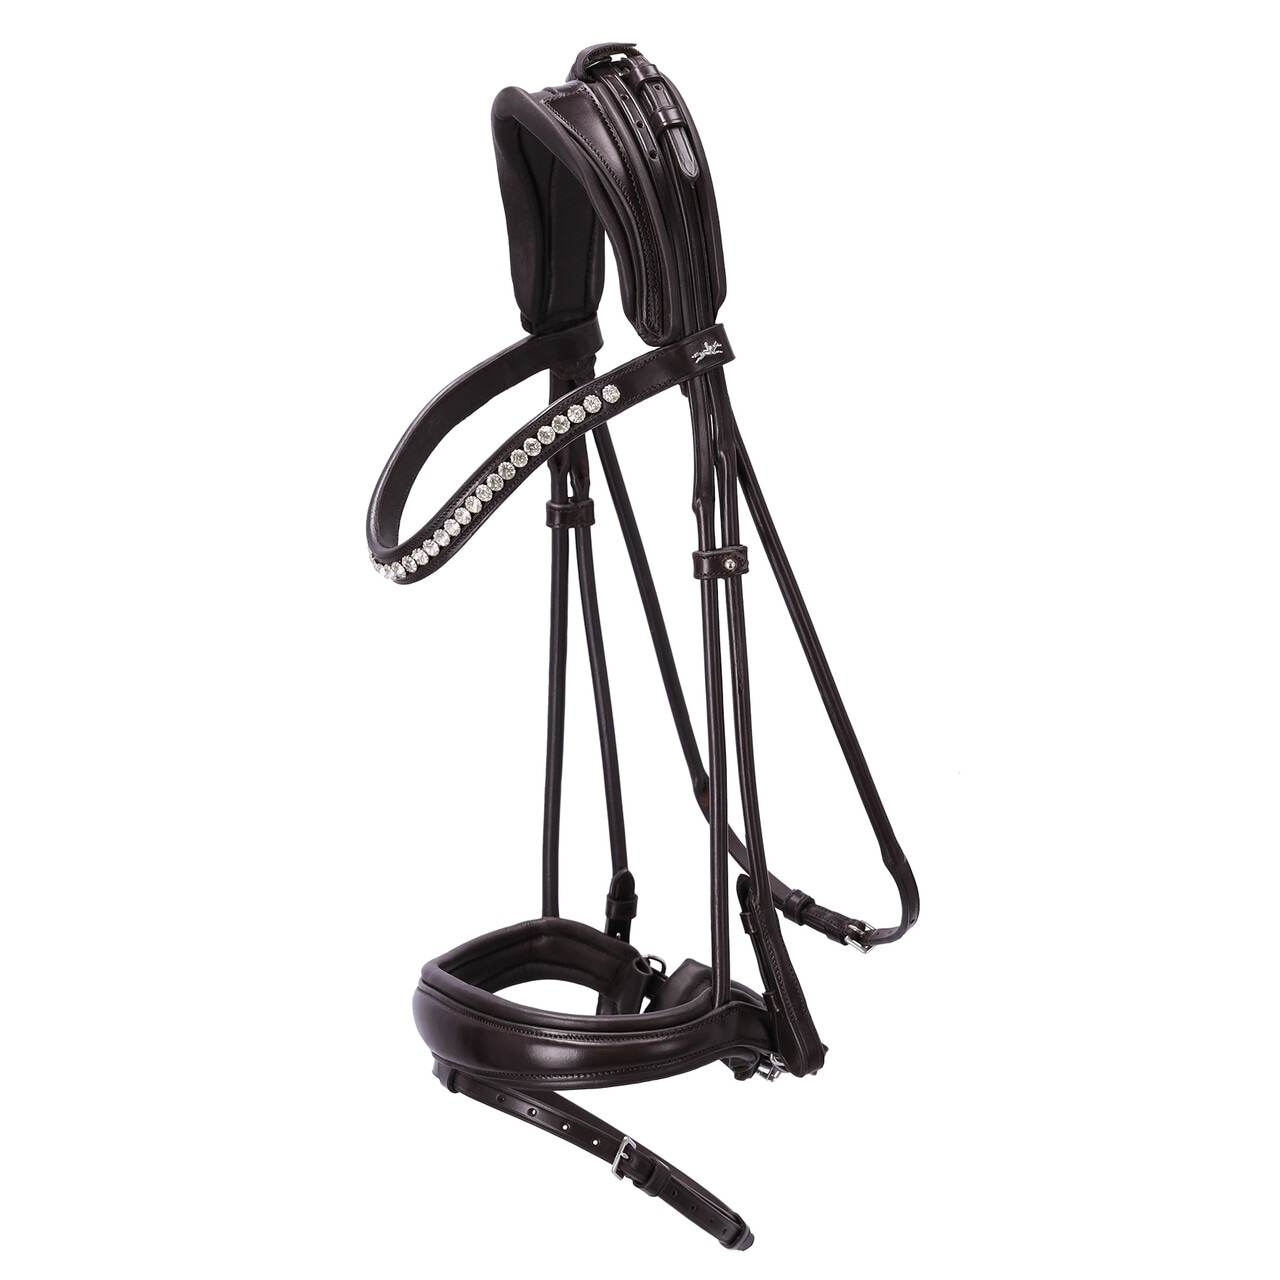 Round sewn bridle Westminster - Brown